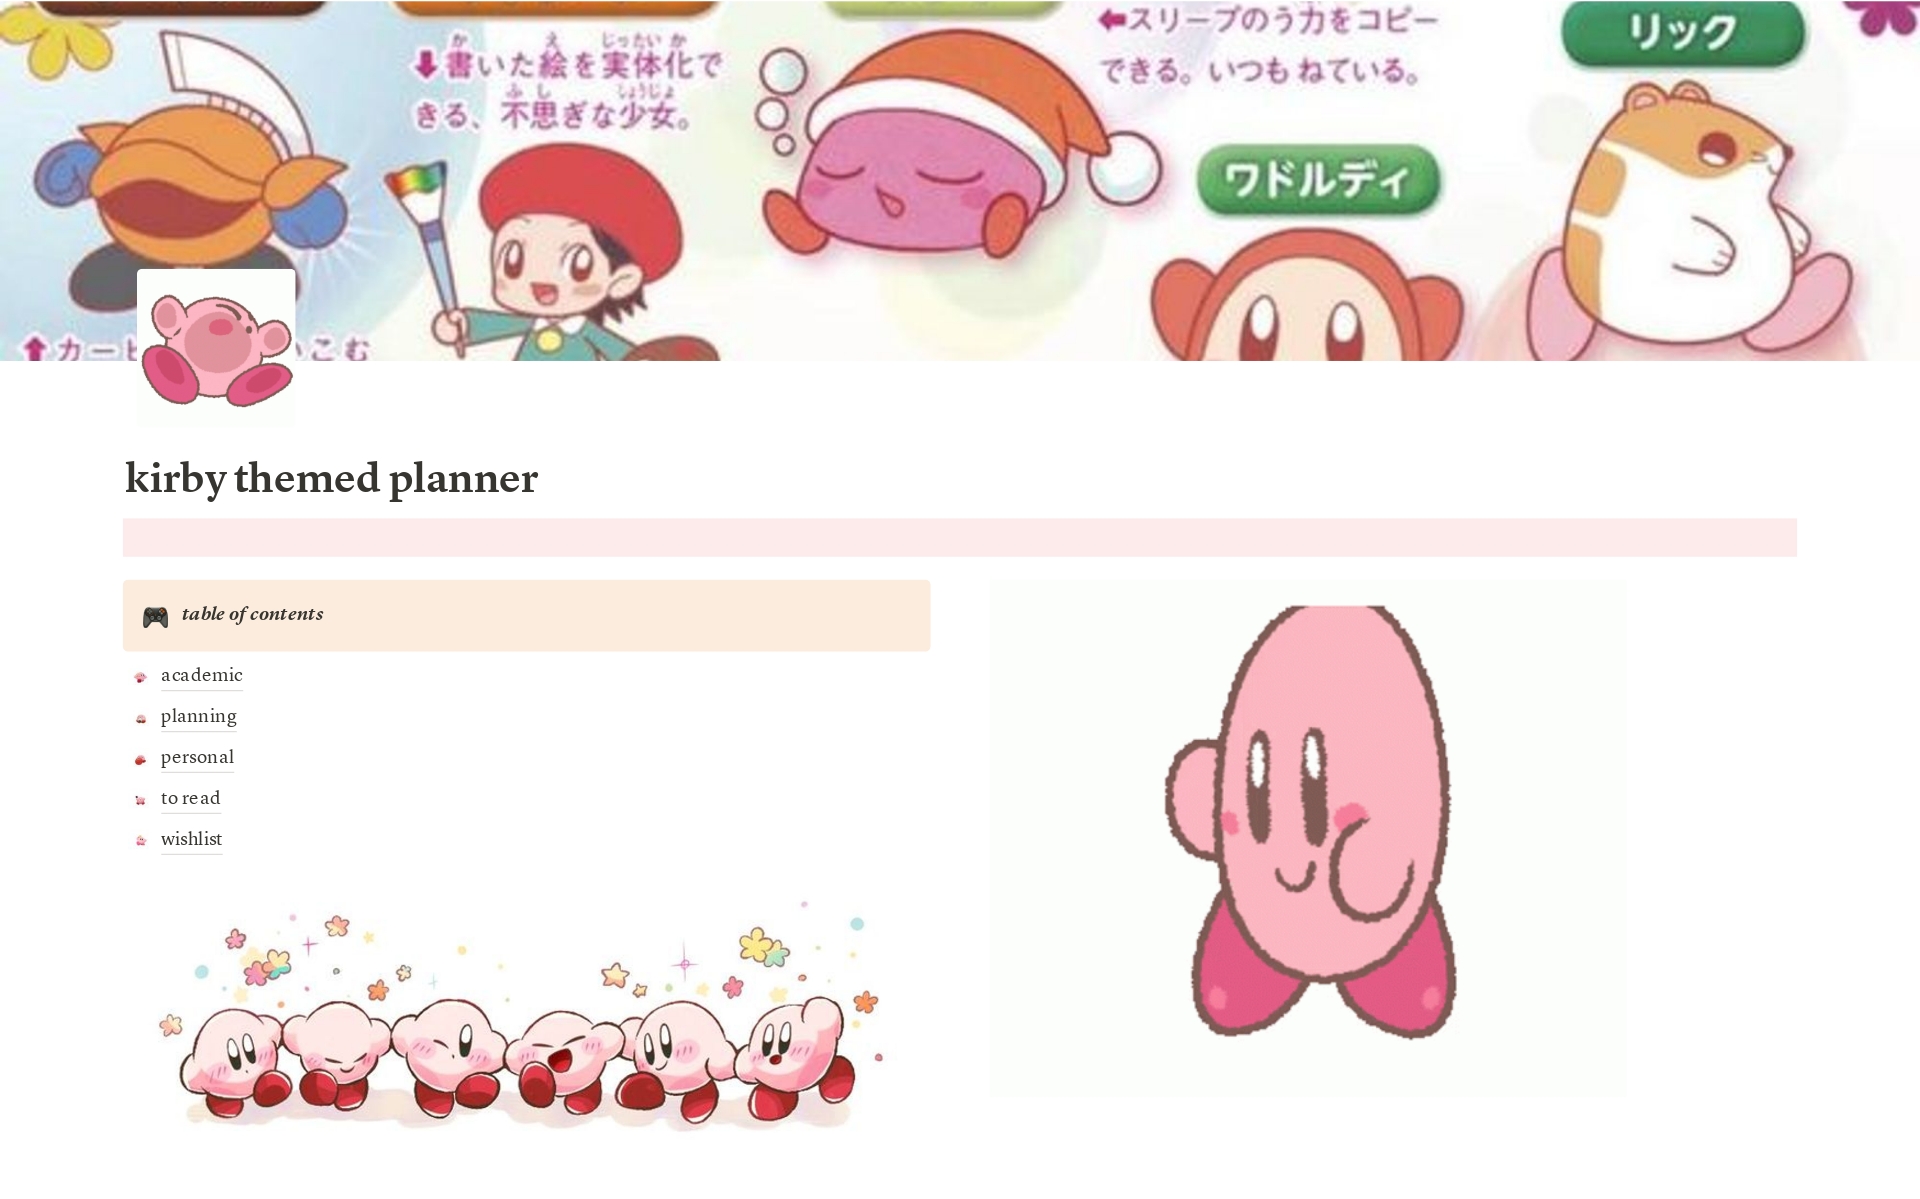 kirby themed planner!!